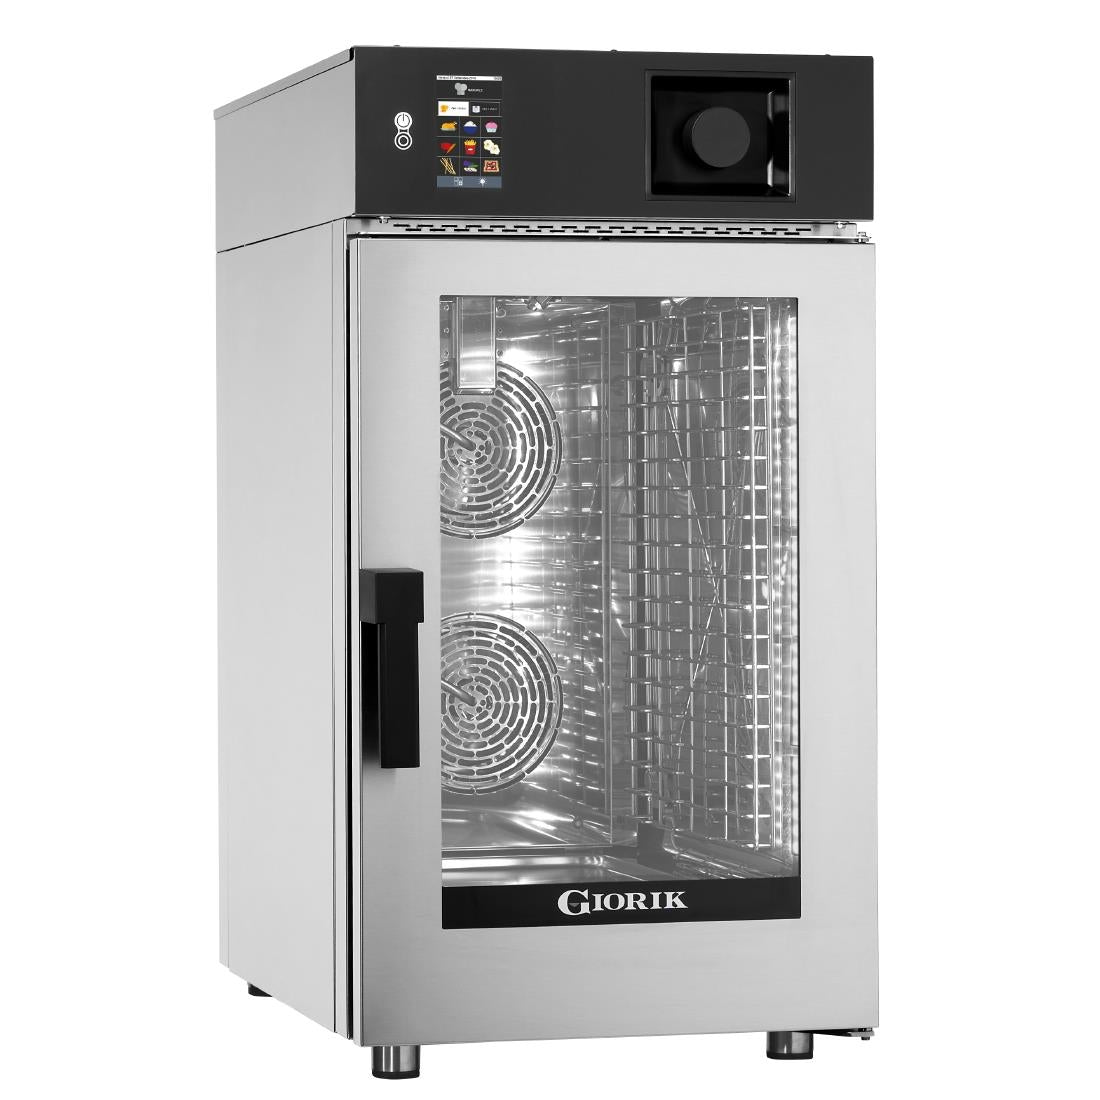 FW872 GIORIK Kore Slimline Electric Combi Oven with Wash System KM101W 10 X 1/1GN JD Catering Equipment Solutions Ltd